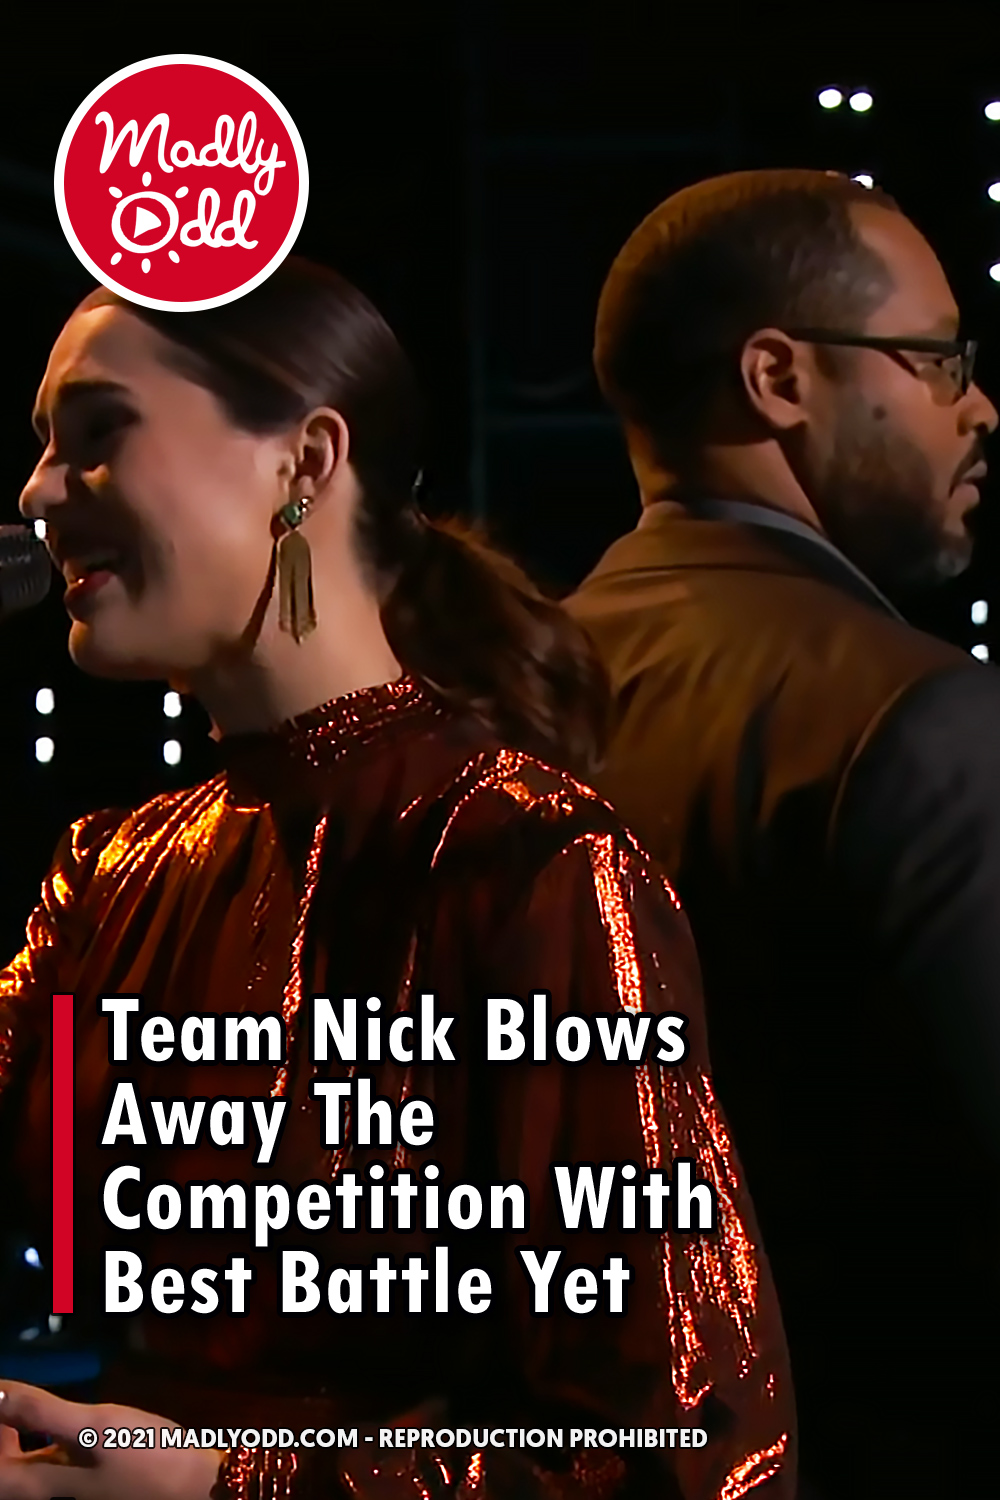 Team Nick Blows Away The Competition With Best Battle Yet